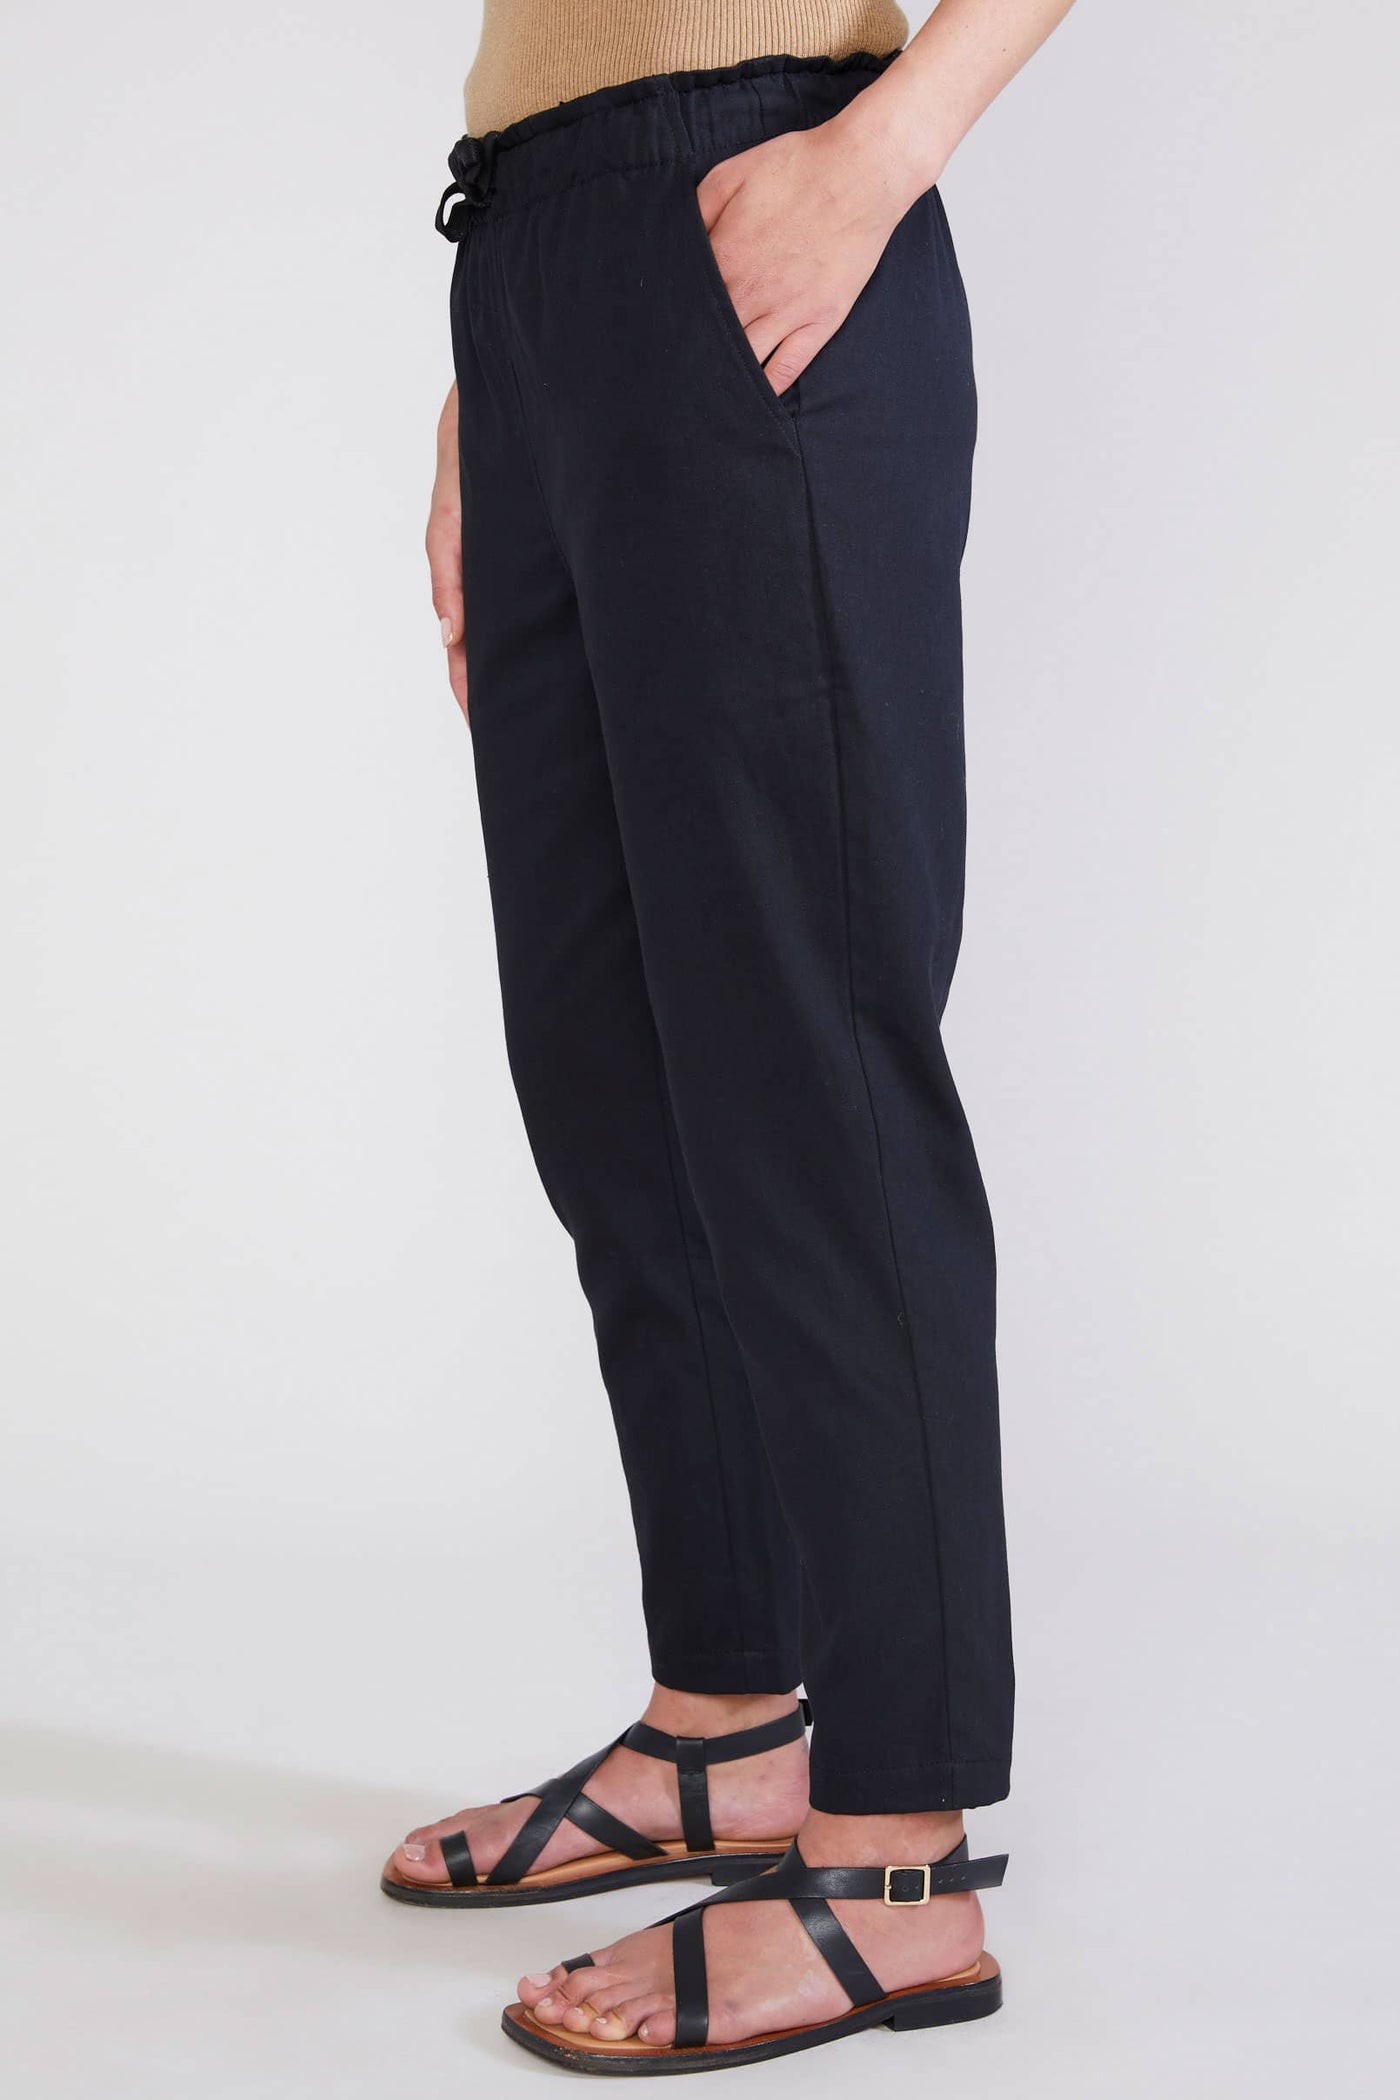 LAING STELLA DRAWSTRING PANT  The Laing Stella Drawstring Pants are the perfect basic wardrobe staple, now available in Black and White.